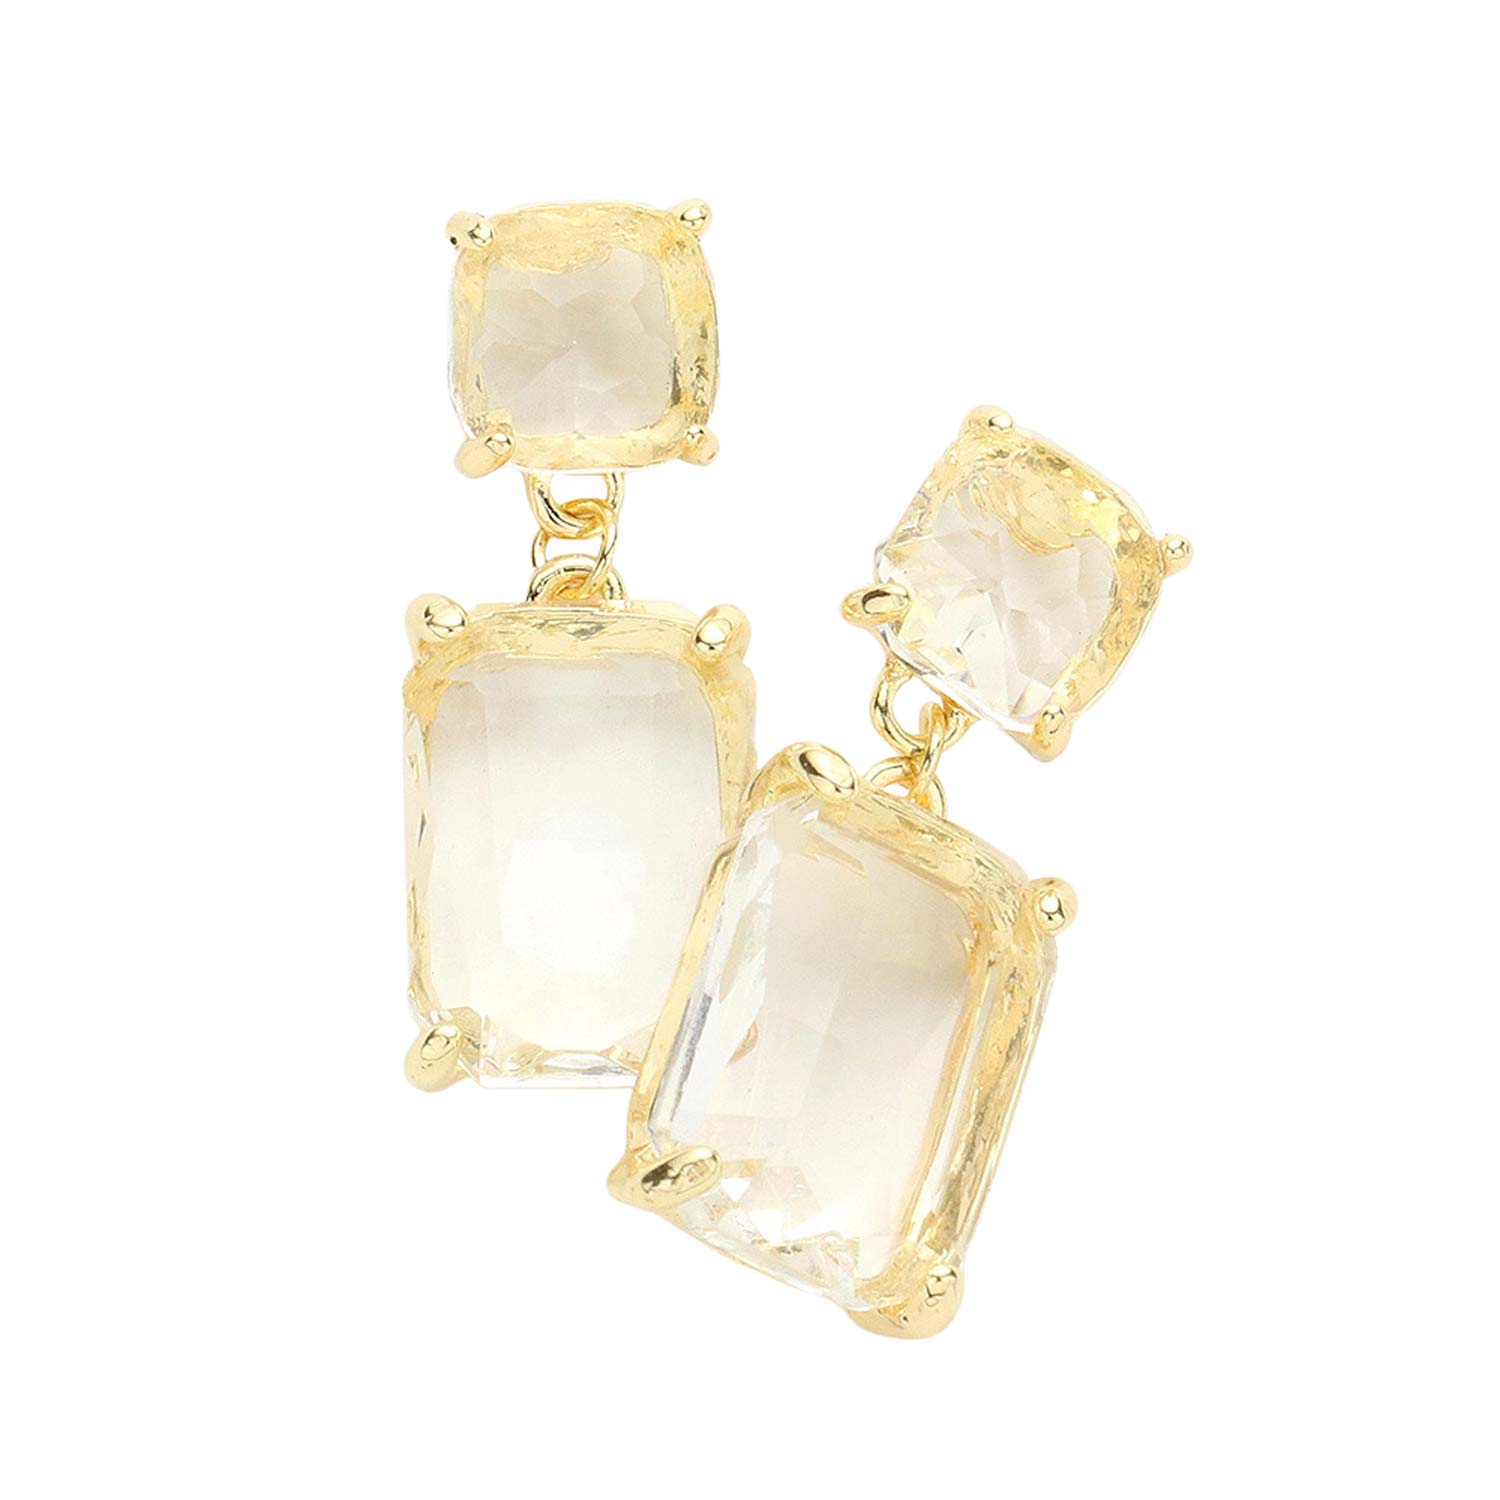 Gold Square Rectangle Link Dangle Evening Earrings, Beautiful Square Rectangle shaped dangle earrings. These elegant, comfortable earrings can be worn all day to dress up any outfit. The elegance of these earrings puts on a pop of color to complete your ensemble. The perfect accessory for adding just the right amount of shimmer and a touch of class to special events.